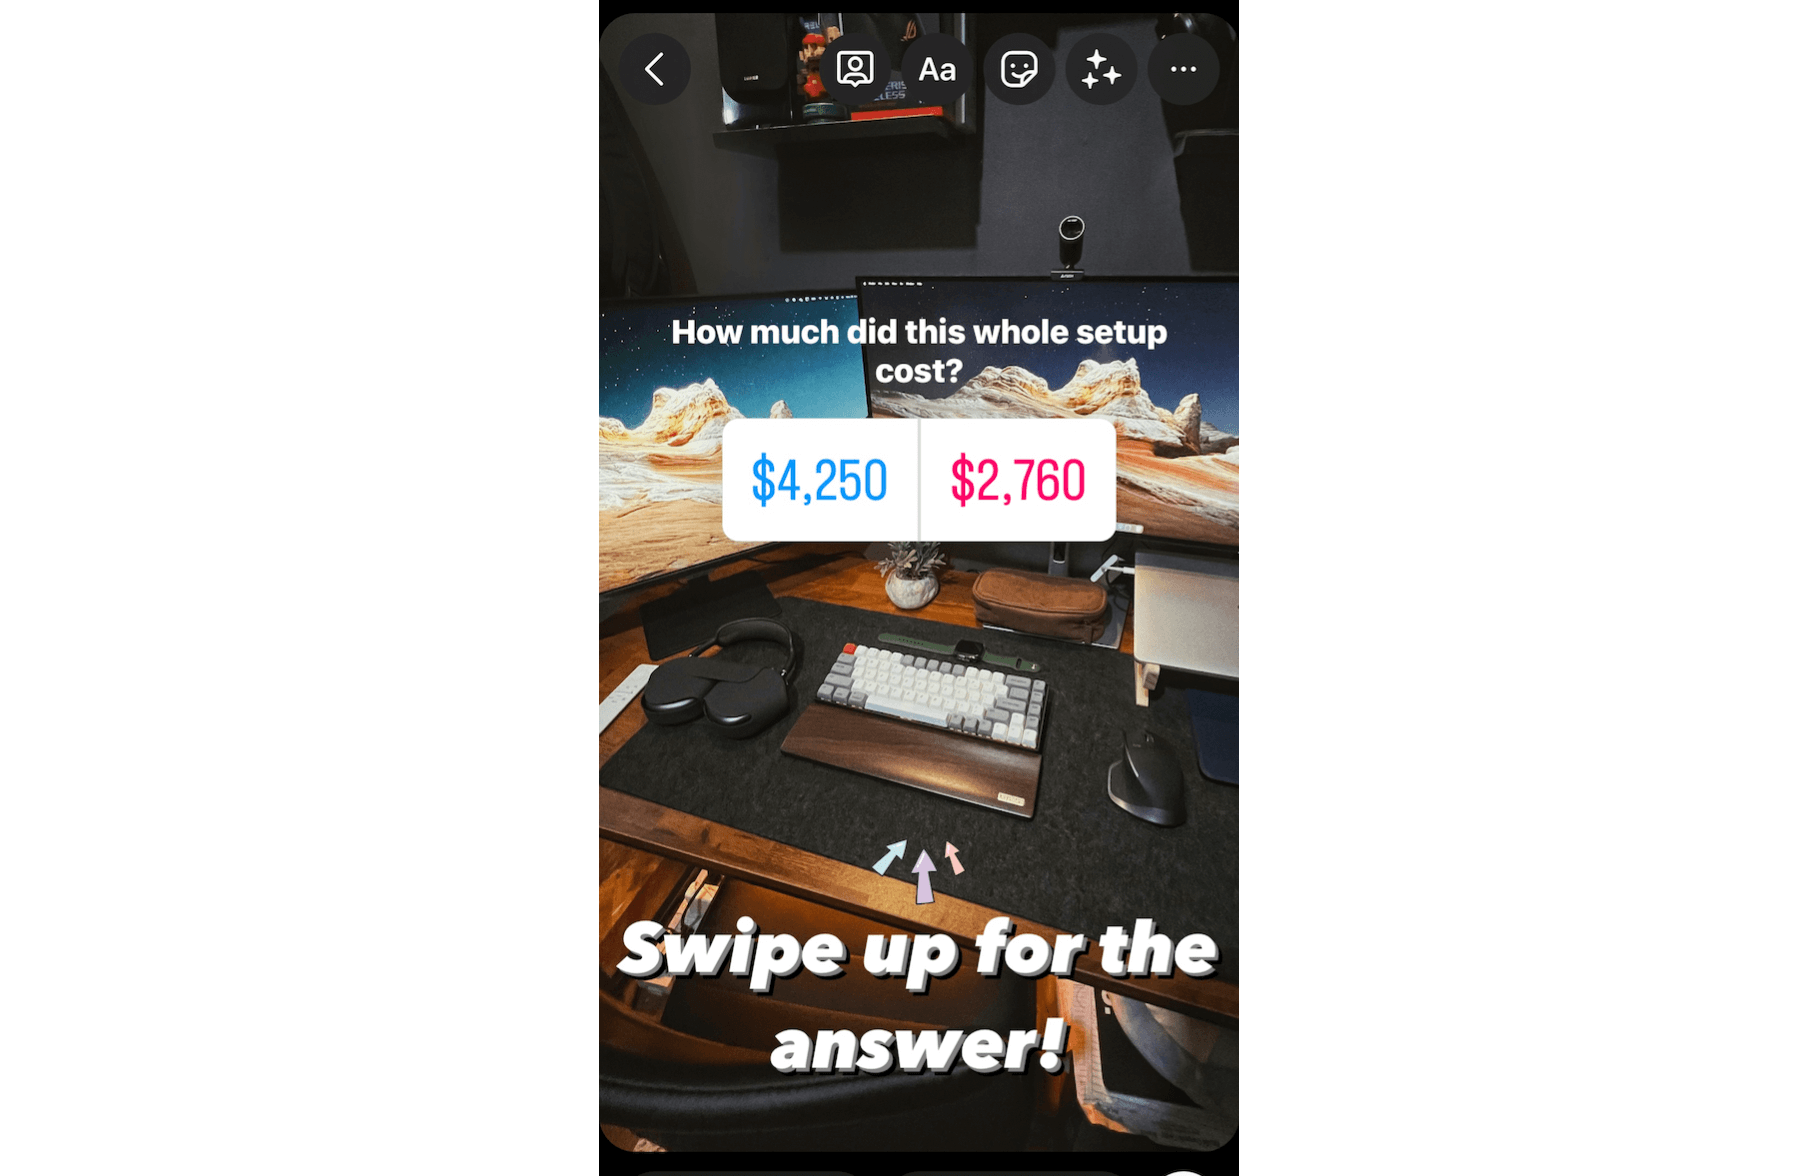 Screenshot of Instagram Polls Example Adding teasers for polls with correct answer